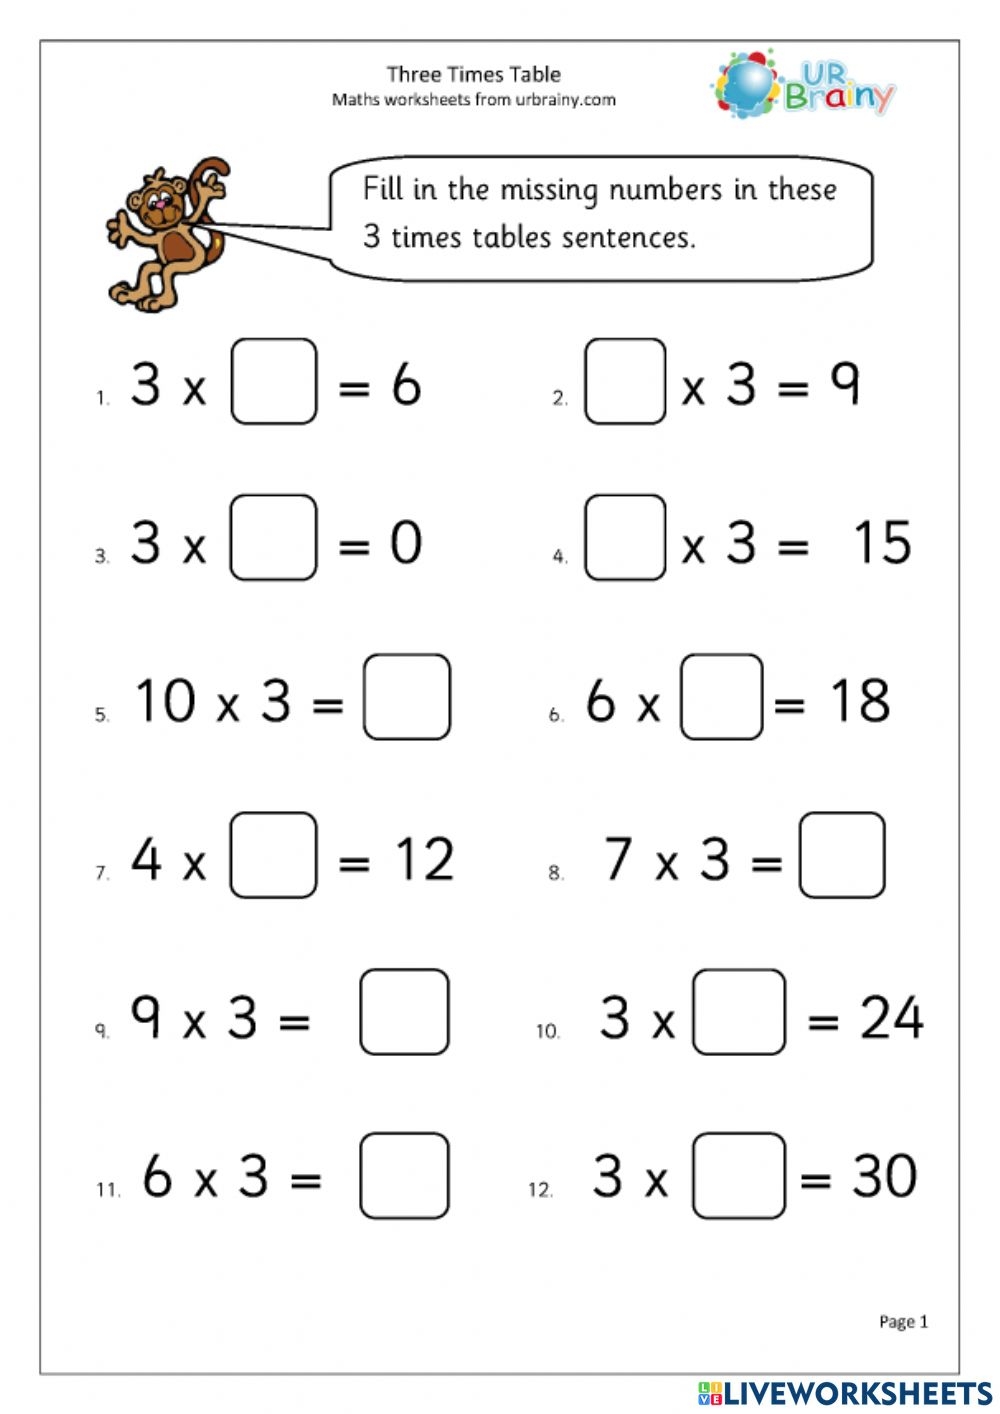 3 Times Table Exercise